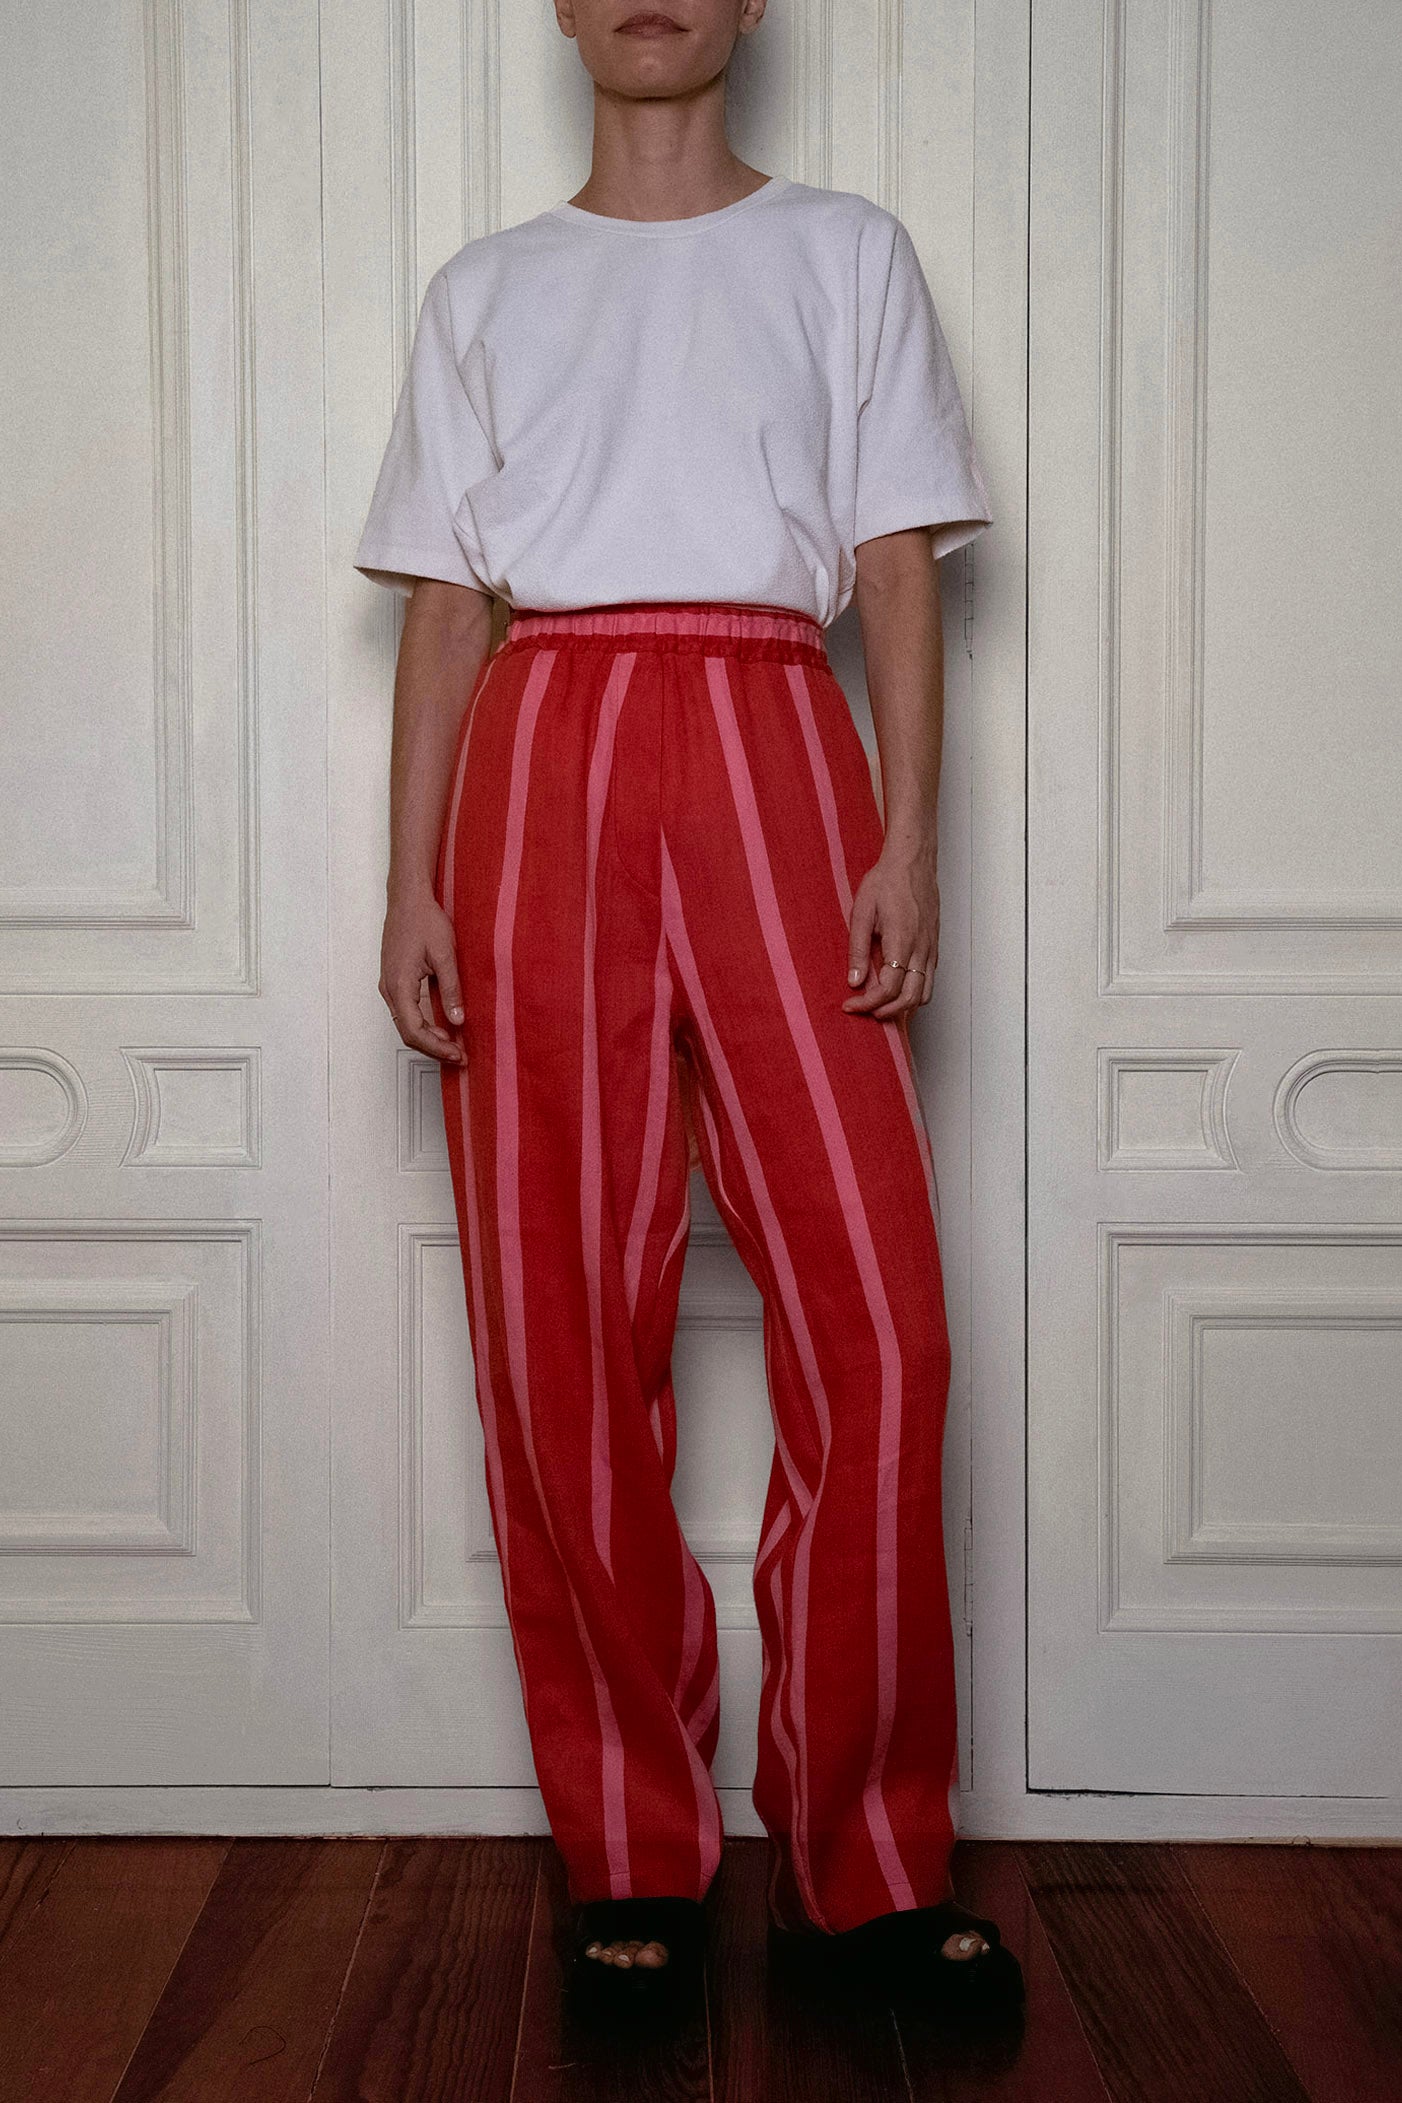 Pantomime trousers